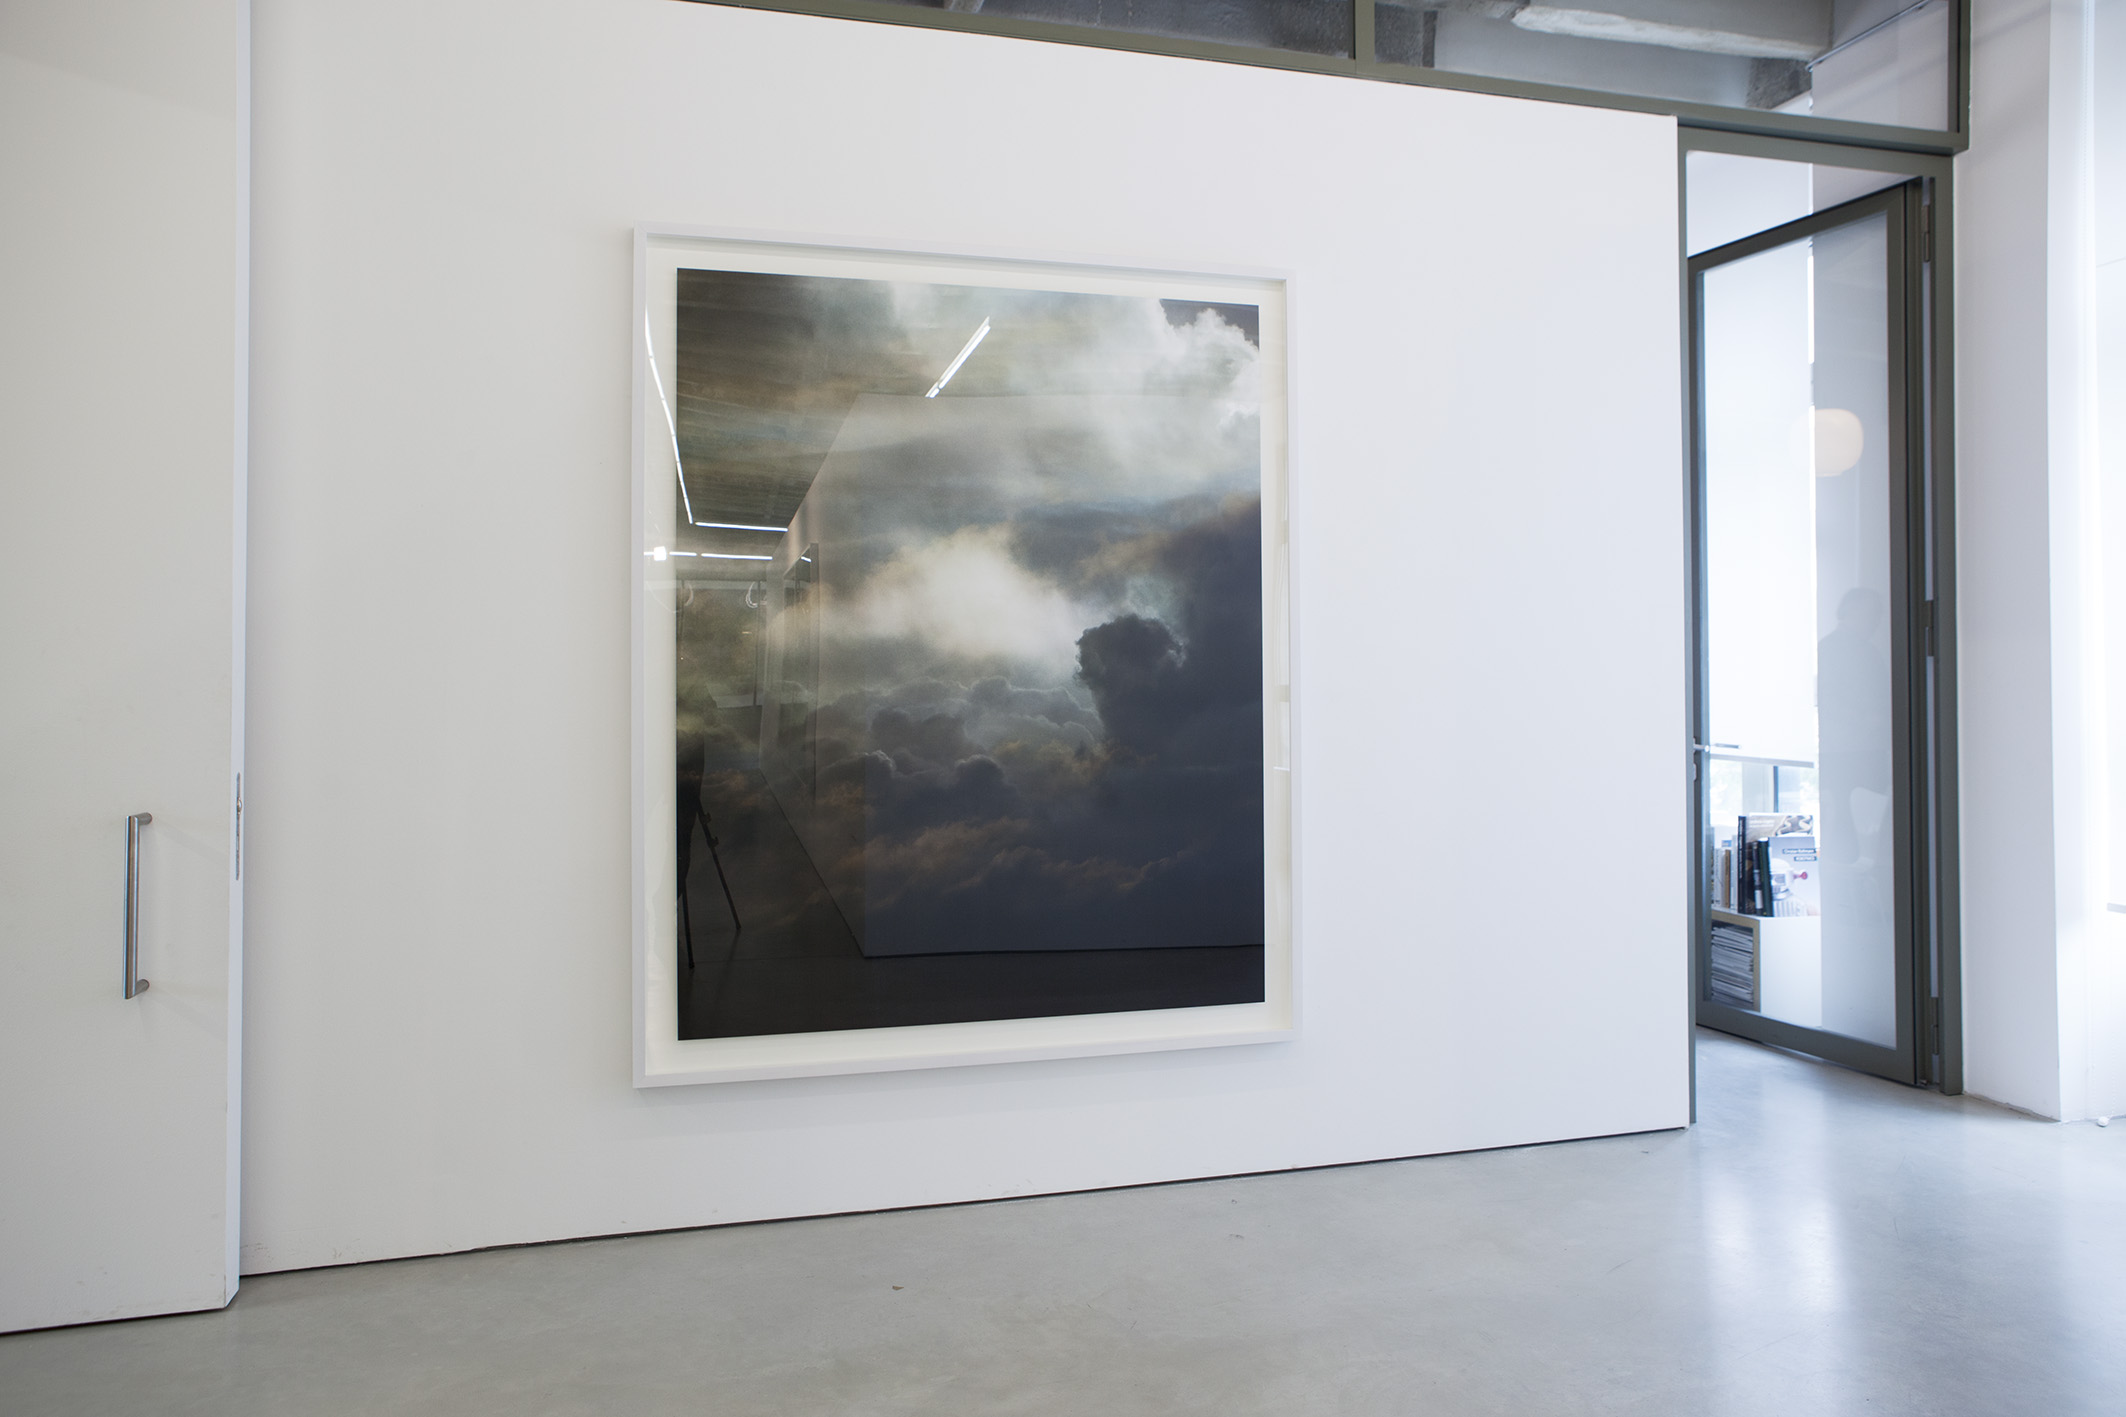 Installation view at Taik Persons, Berlin, 2014